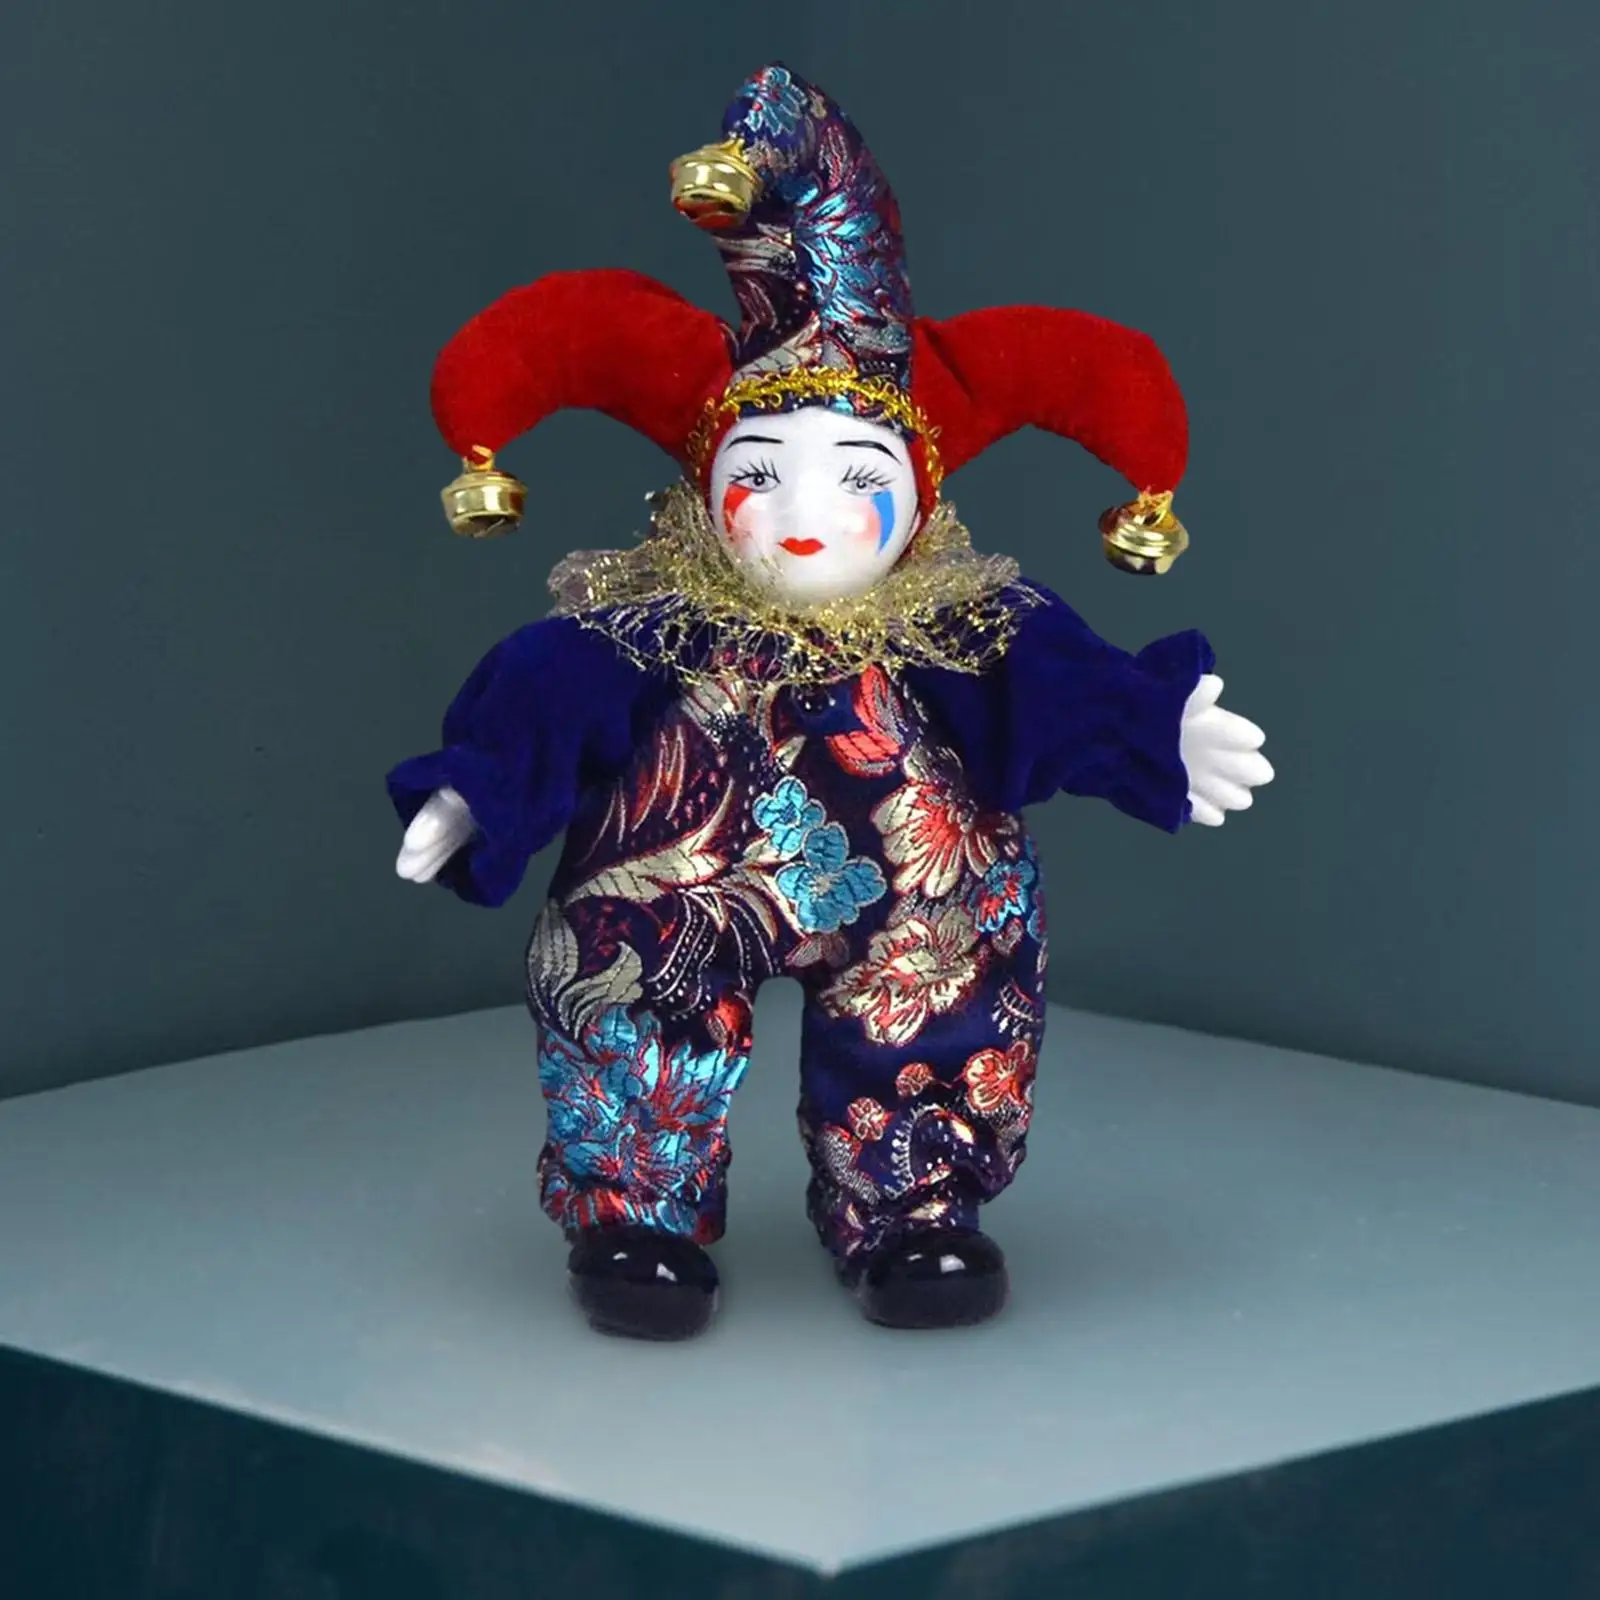 

Clown Doll Antique Doll Painted Face Home Display 7.87'' Jester Doll for Souvenirs Party Favor Festival Birthday Arts Crafts